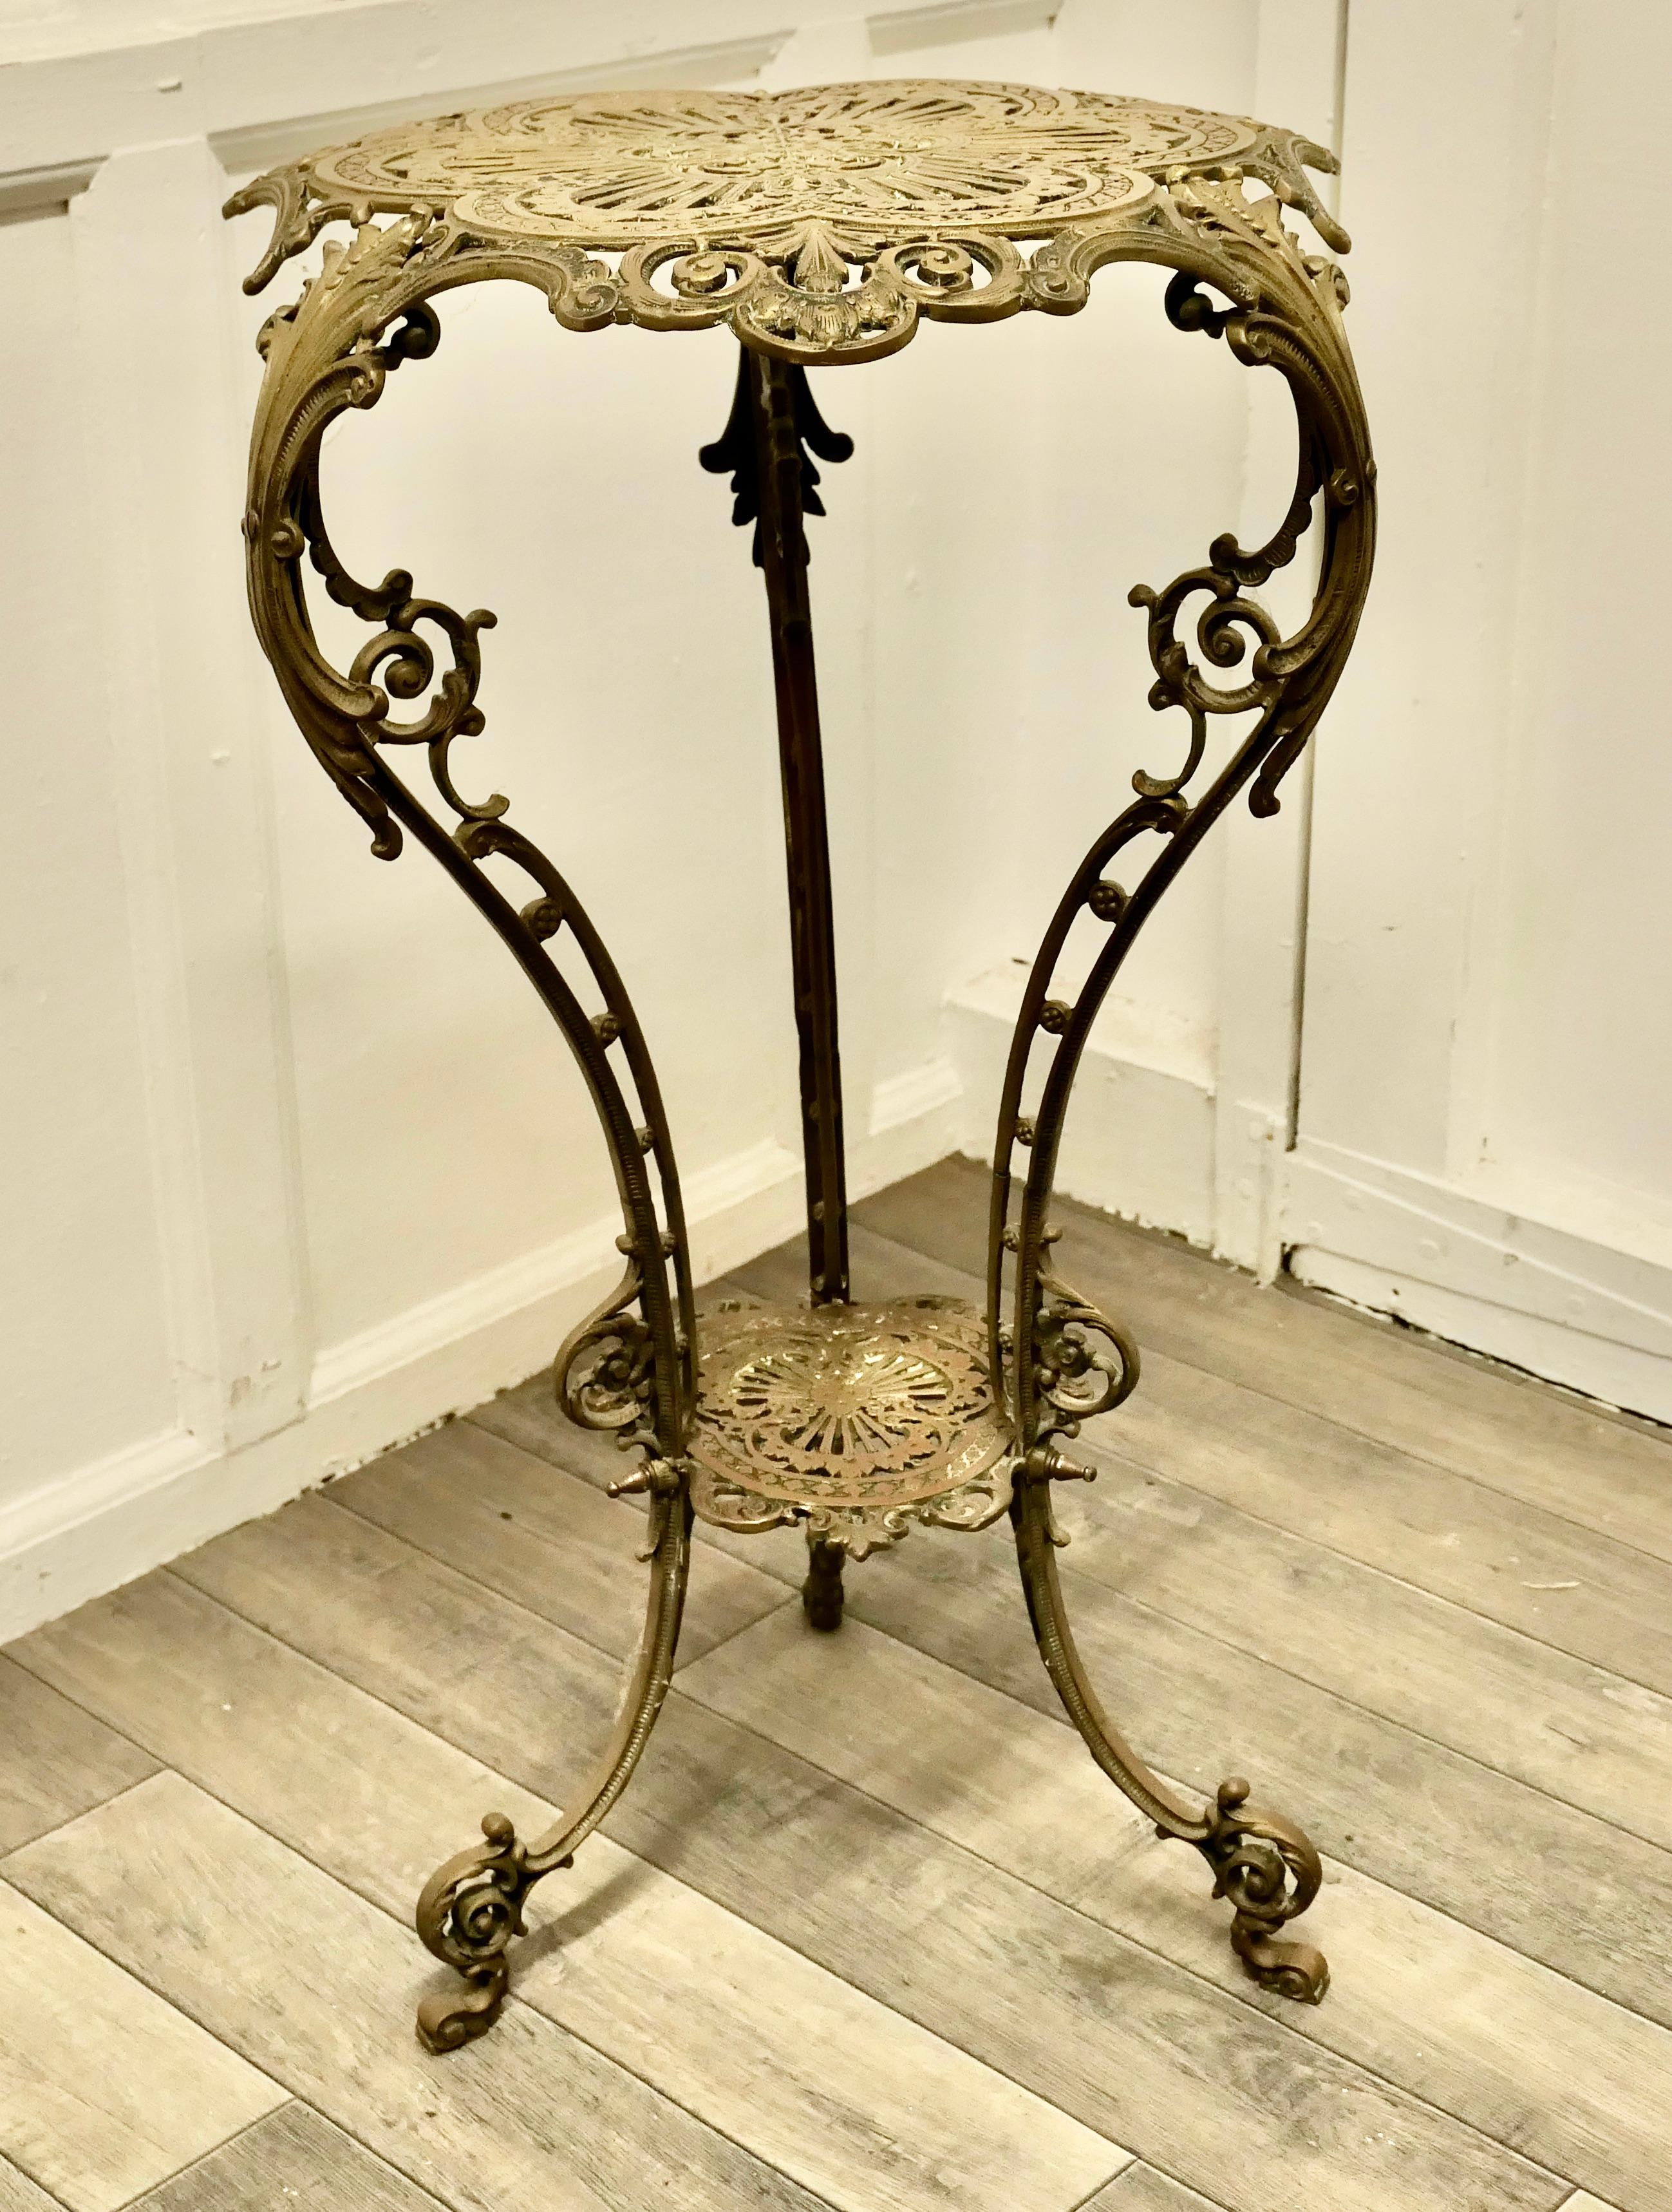 Tall Pierced Brass Plant Stand Table

A superb piece tall and elegant, the table is made in solid brass and very decorative, it has 3 scrolling legs and an undertier. The table has a floral theme to the decoration with acanthus leaves and scrolls